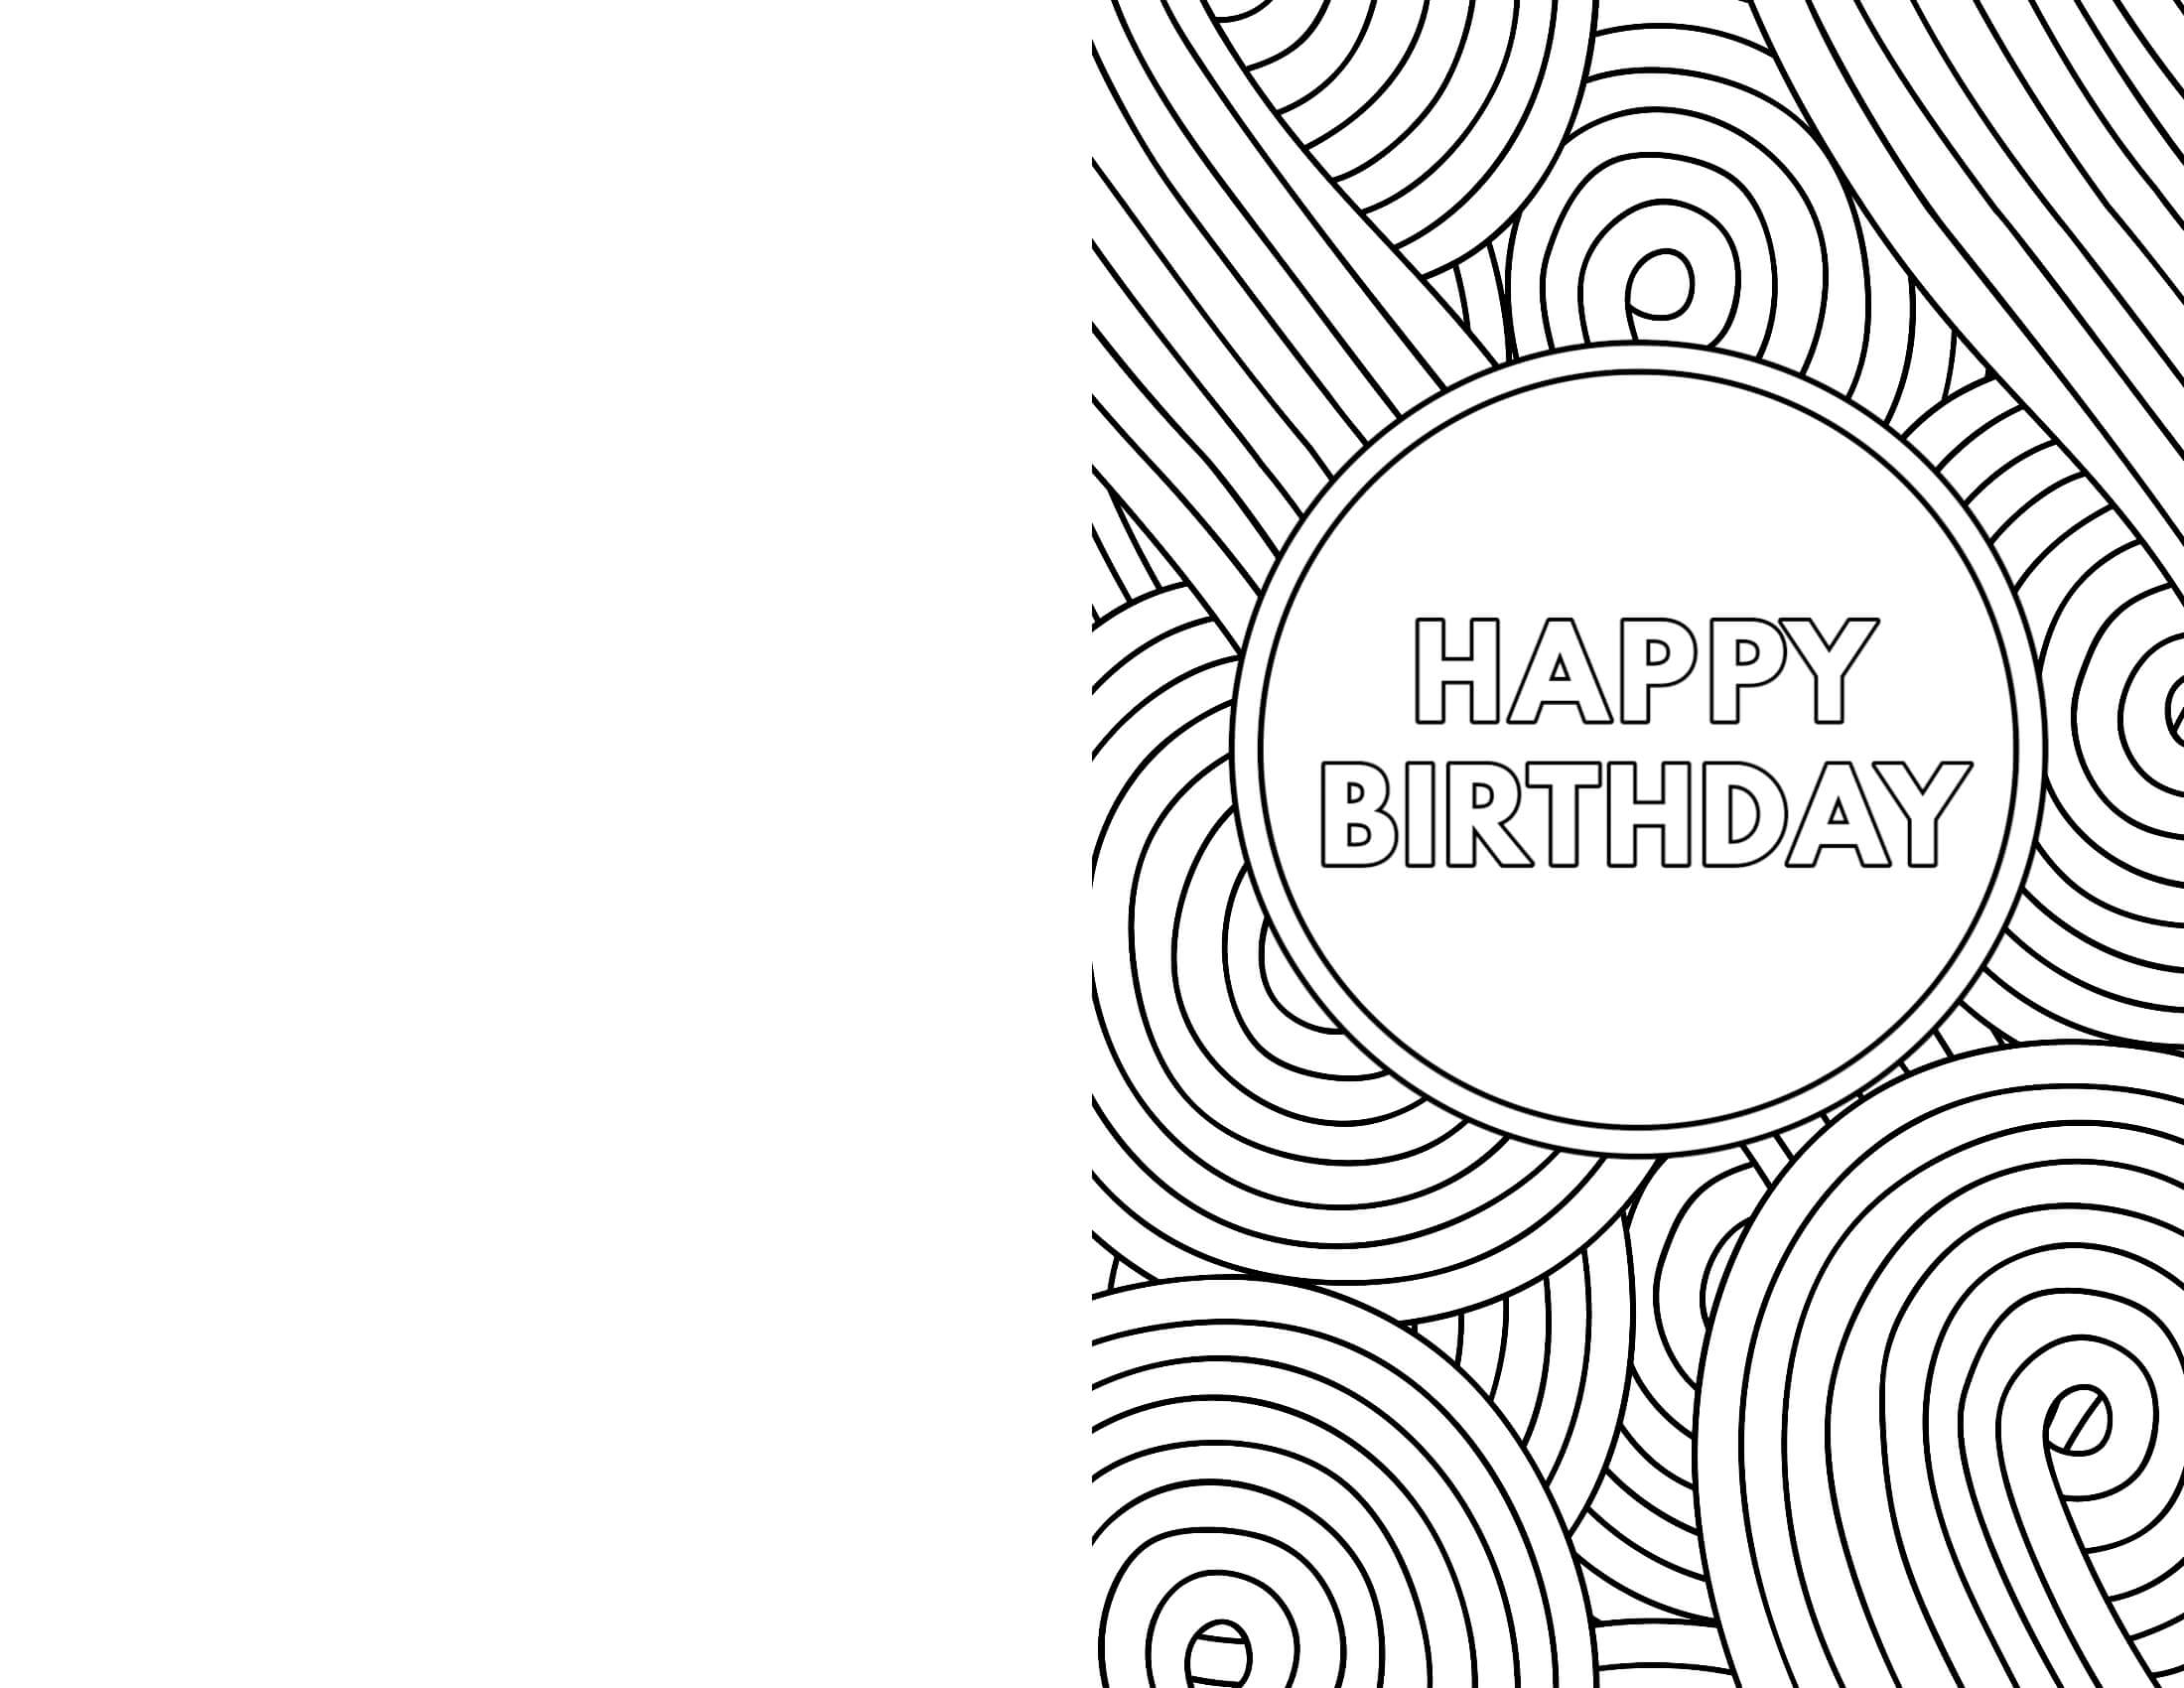 Free Printable Birthday Cards – Paper Trail Design Within Foldable Birthday Card Template